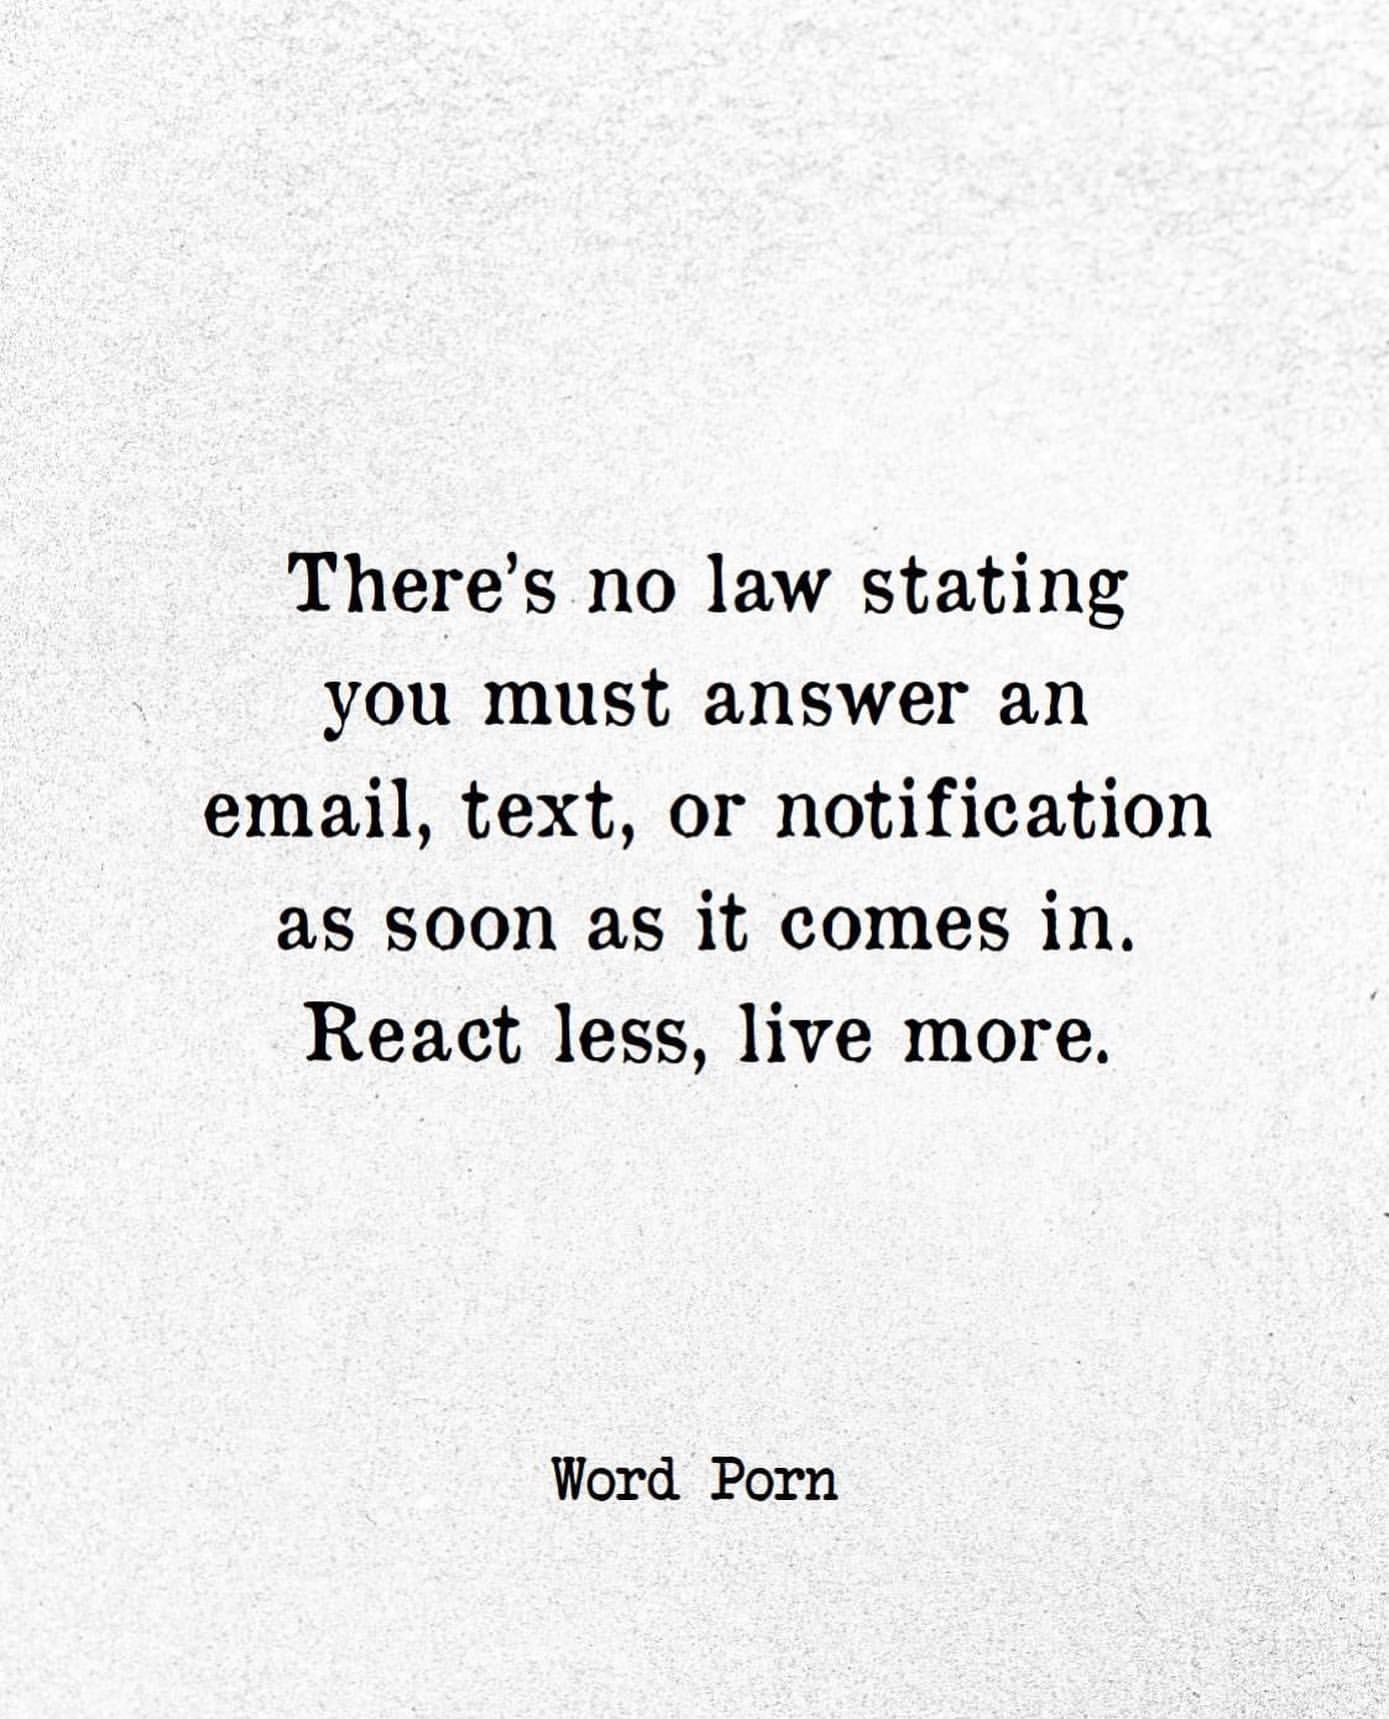 There's no law stating you must answer an email, text, or notification as soon as it comes in. React less, live more.